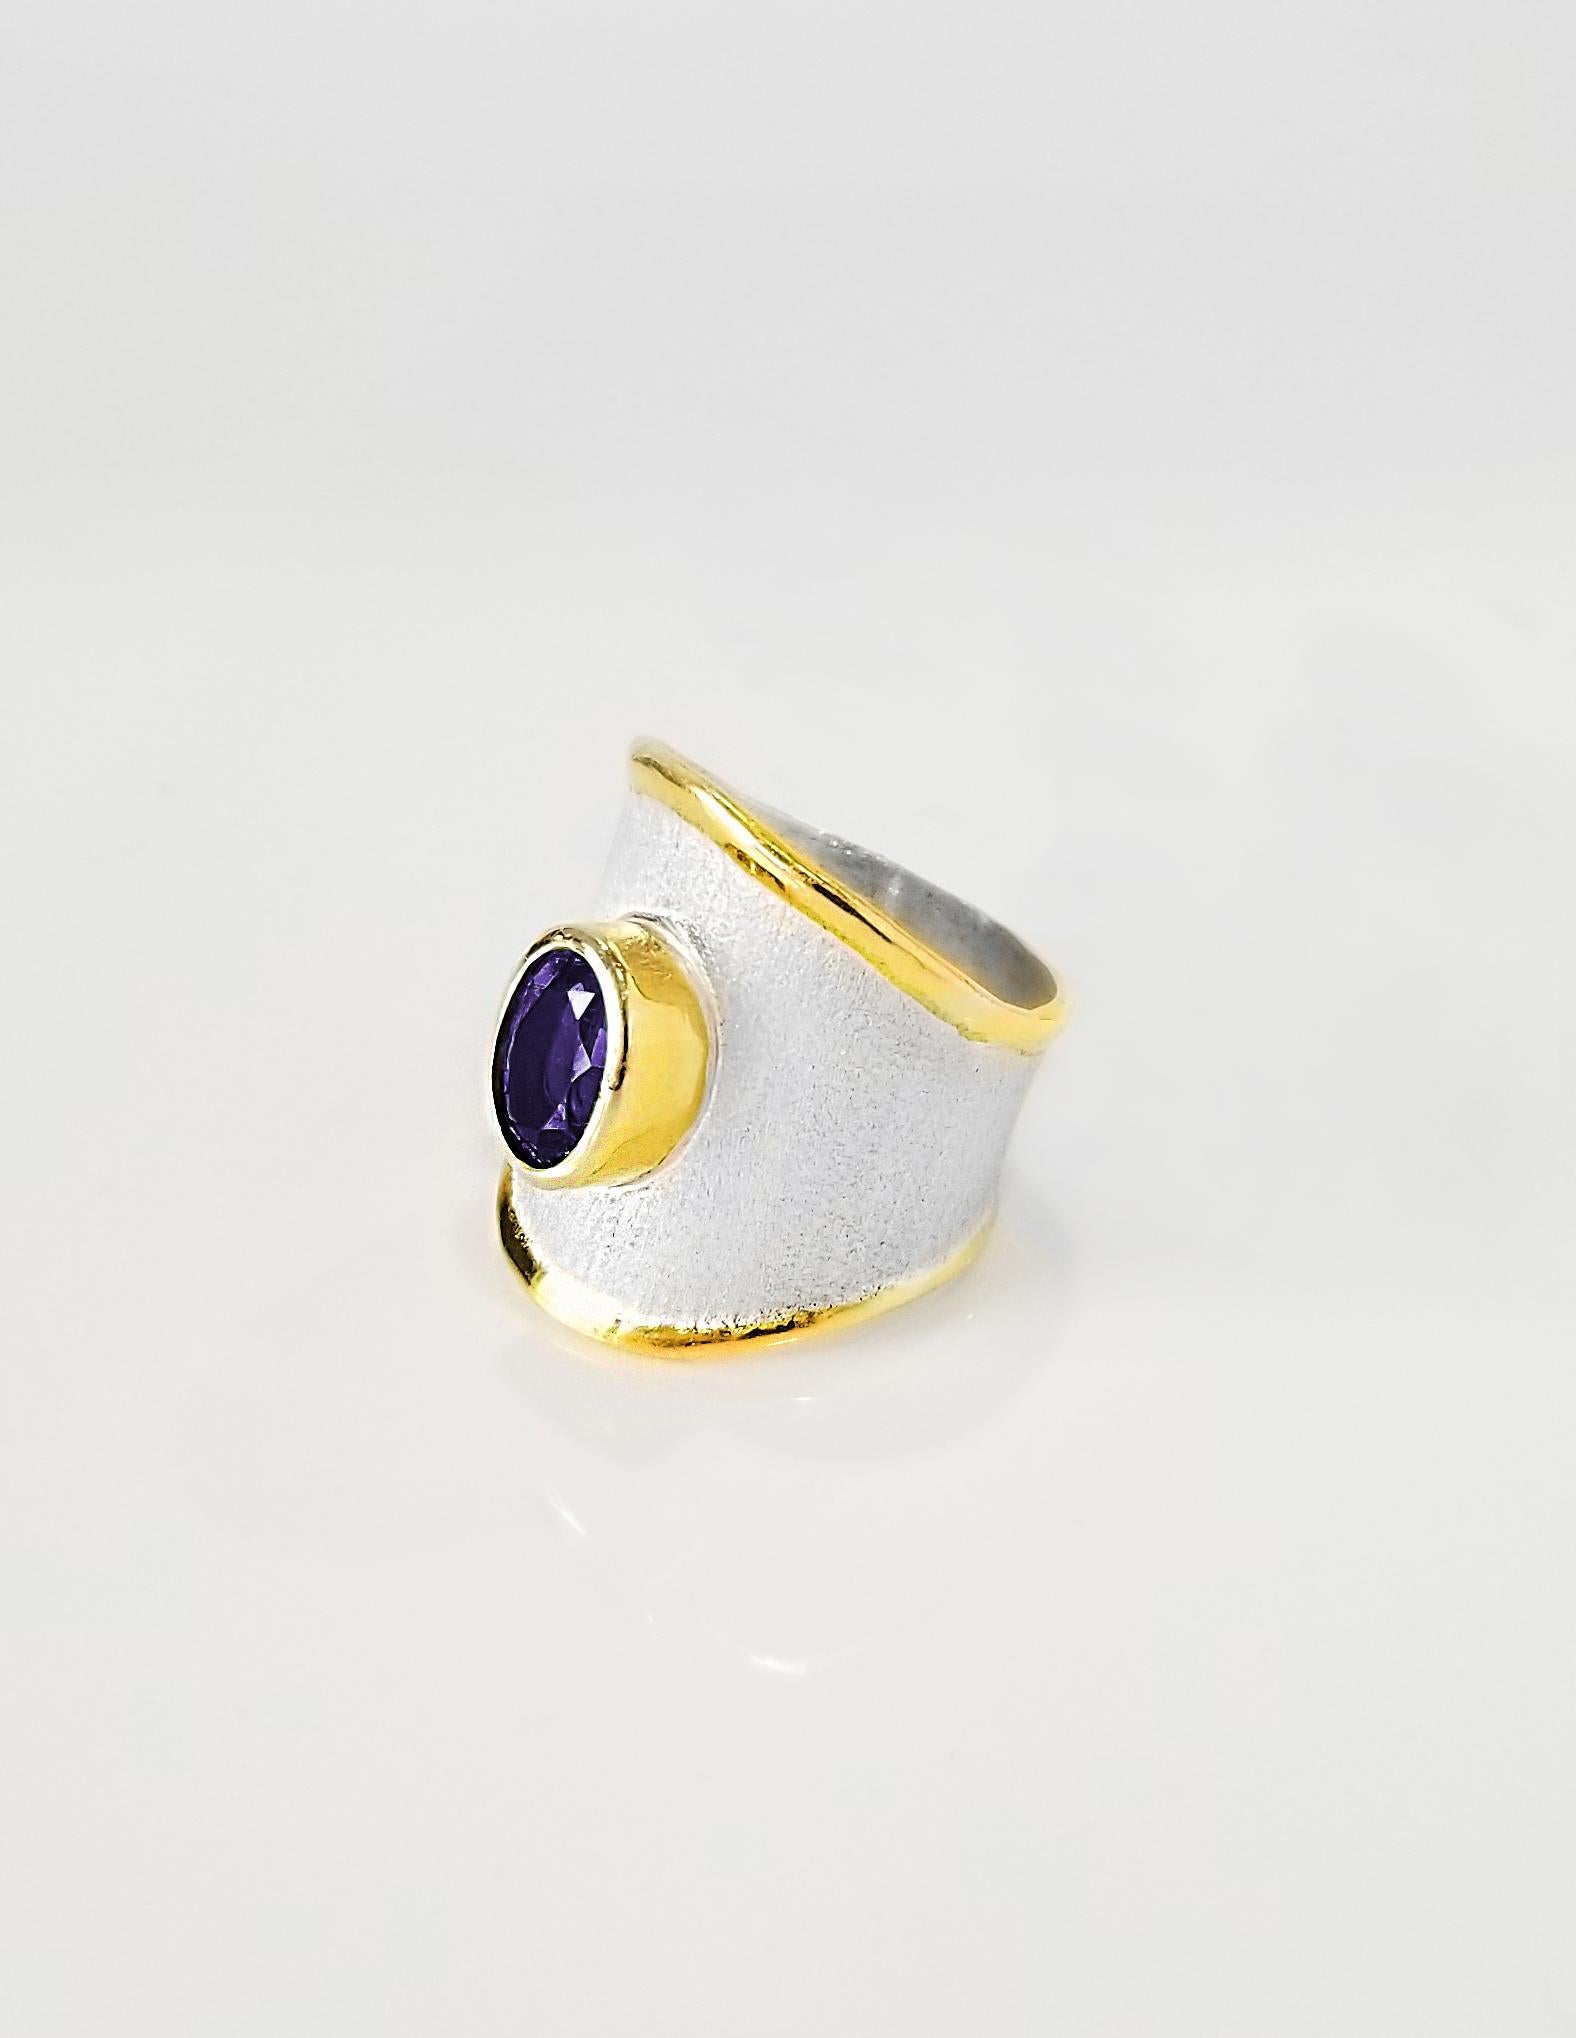 Yianni Creations Midas Collection 100% Handmade Artisan Ring from Fine Silver with a layover of 24 Karat Yellow Gold features 1.25 Carat Amethyst complimented by unique techniques of craftsmanship - brushed texture and nature-inspired liquid edges.